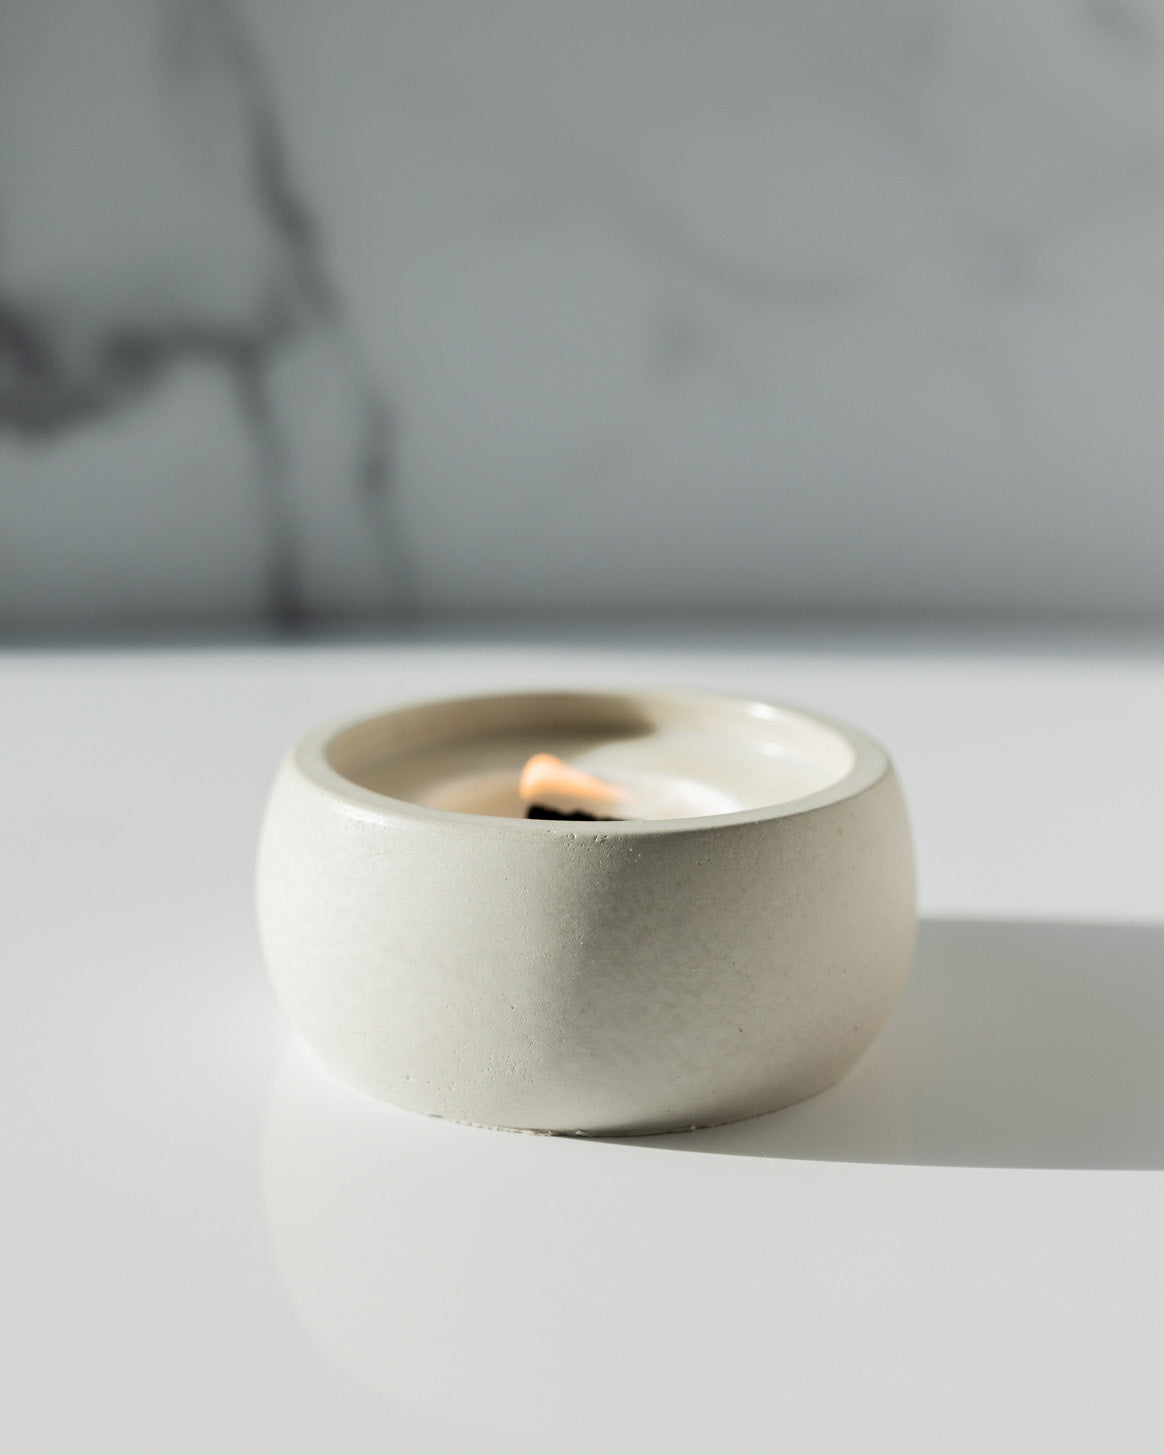 Mull It Over Coconut Soy Candle - Concrete Wooden Wick Vessel